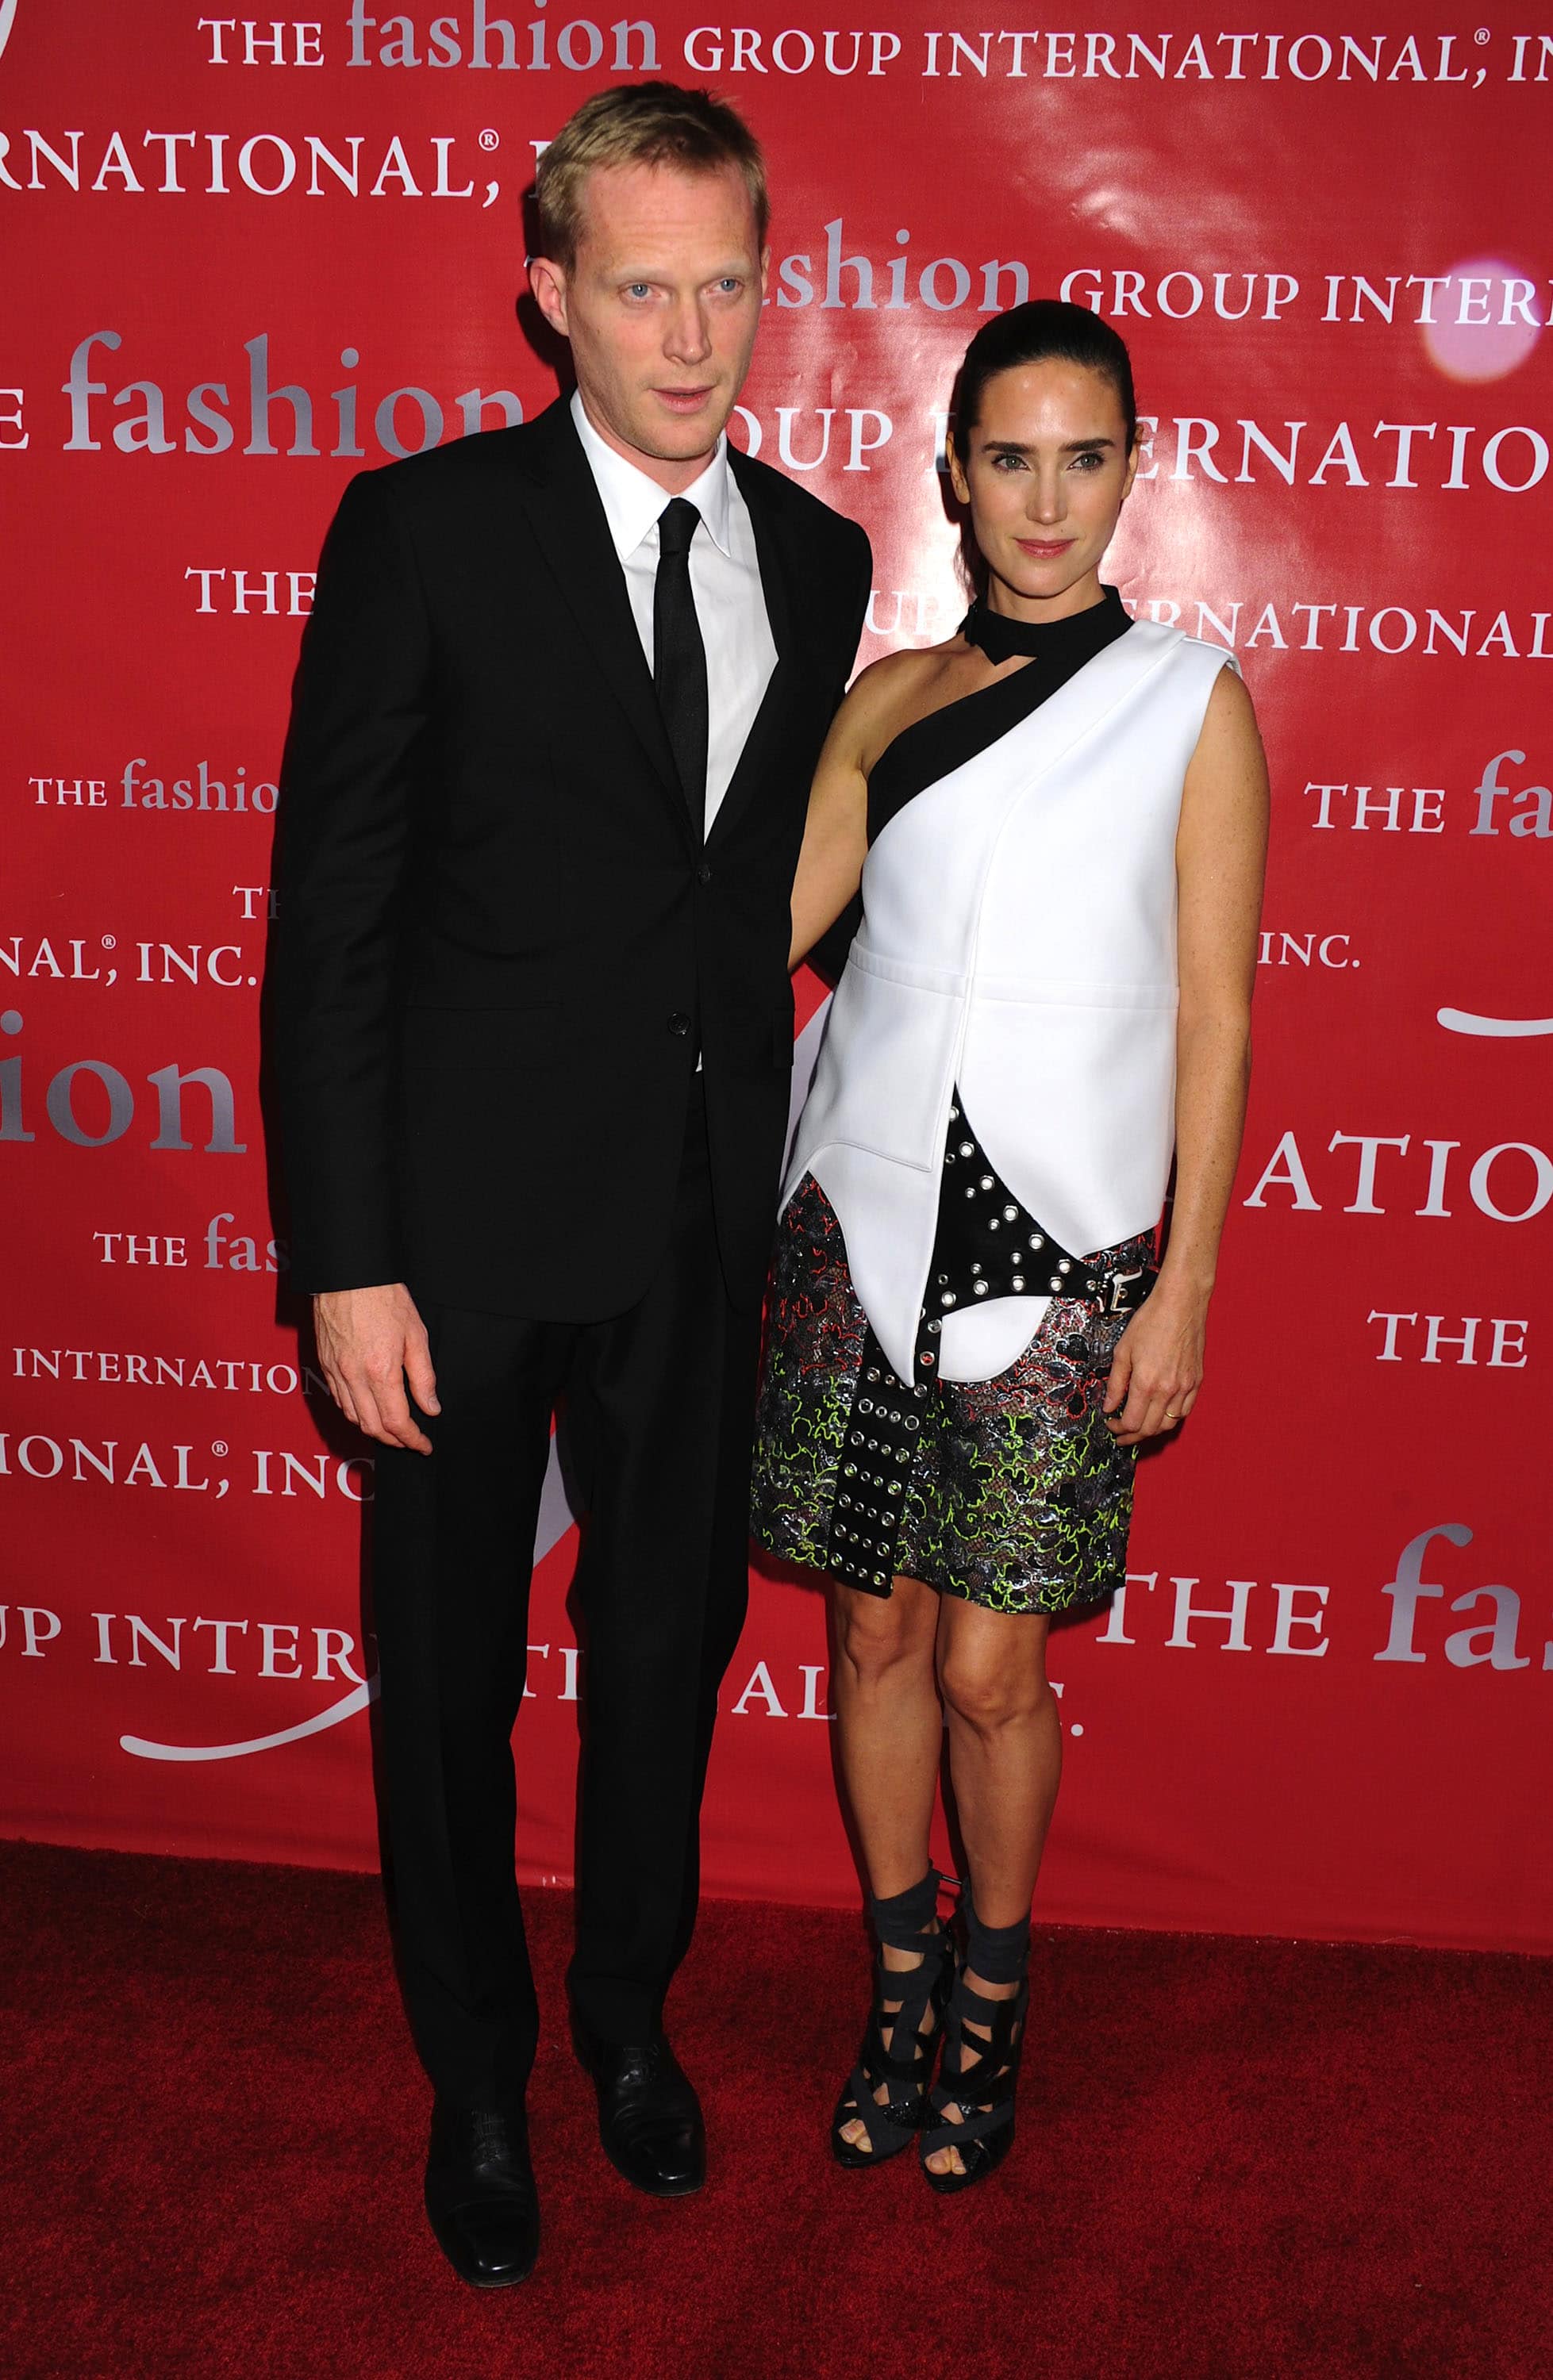 Joined by her husband Paul Bettany, Jennifer Connelly later decided to take off the white asymmetrical top